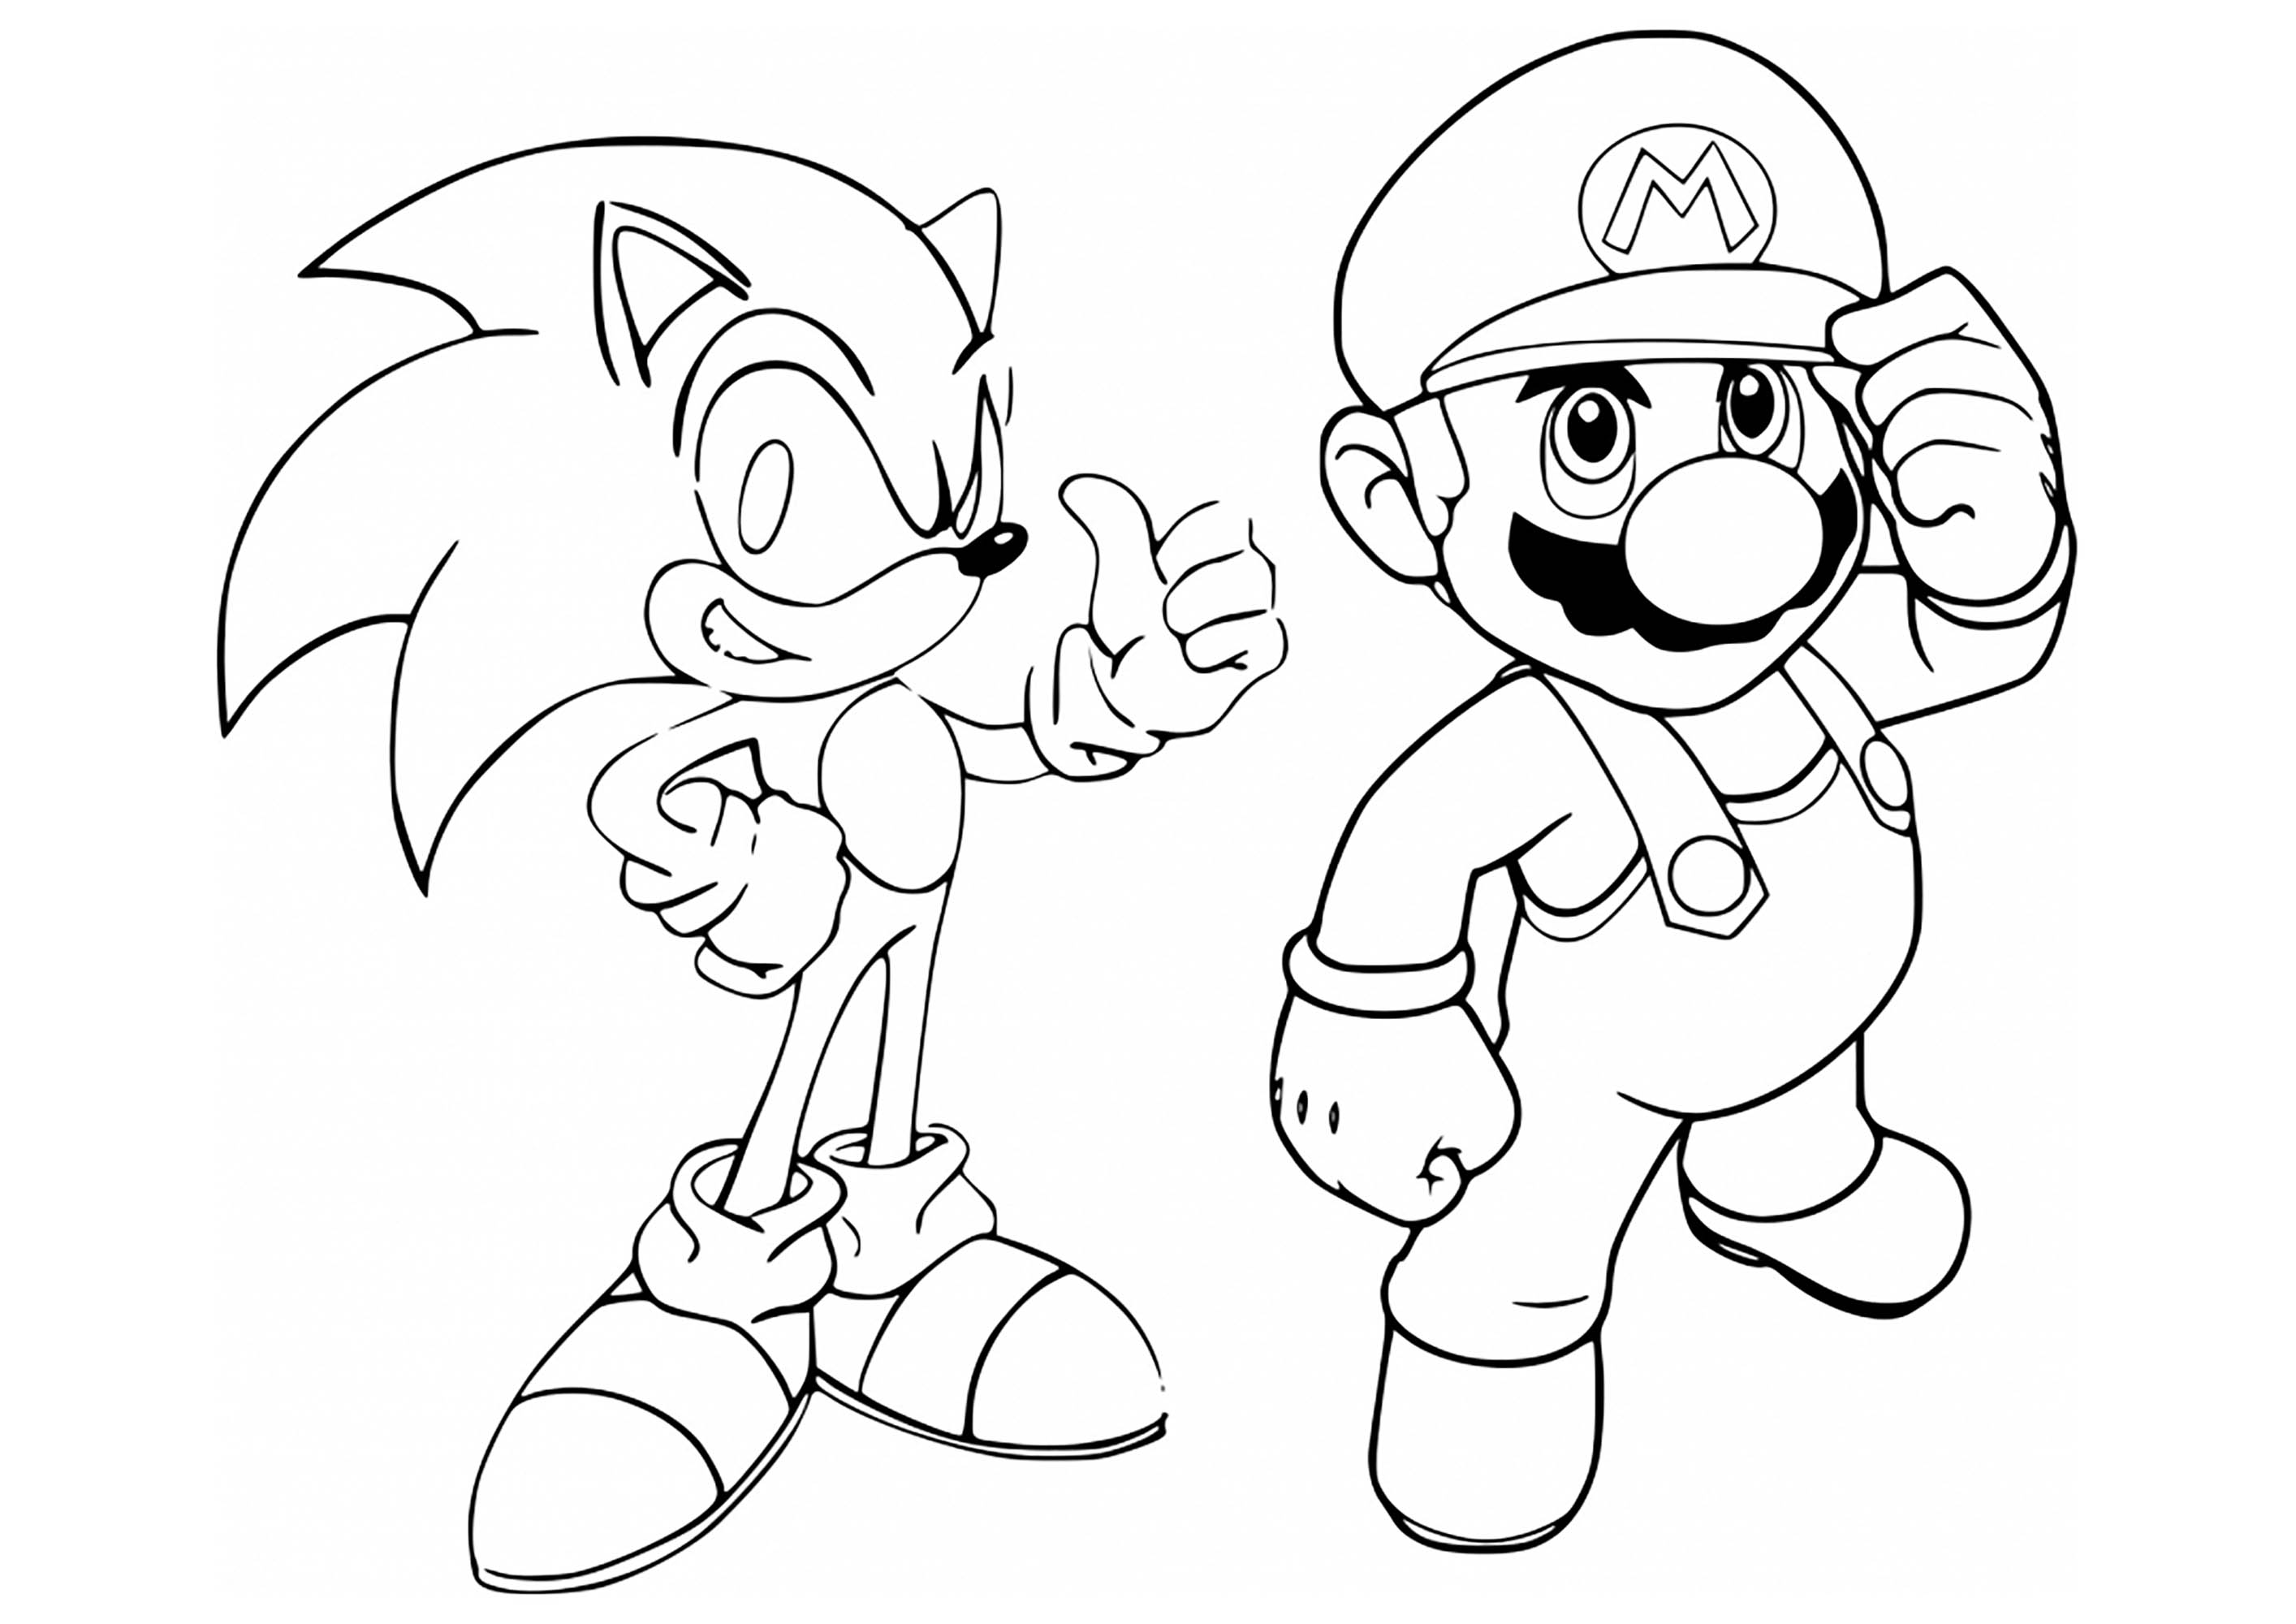 Color the two friends : Mario & Sonic